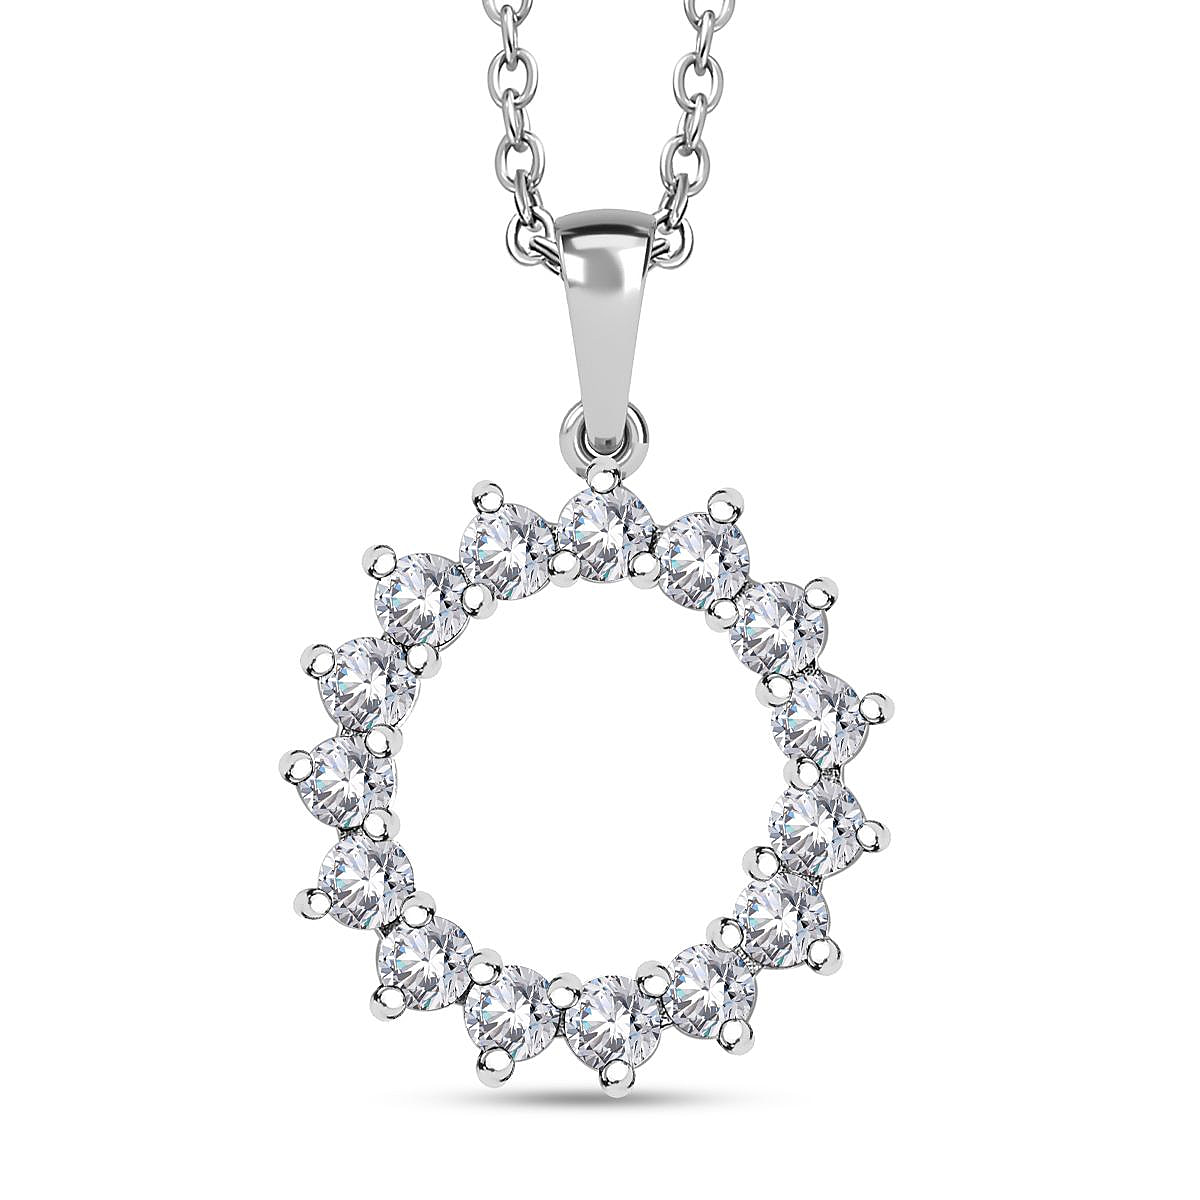 Natural Zircon Sterling Silver Circle Pendant with Stainless Steel Chain (Size 20), 2.25 Ct.